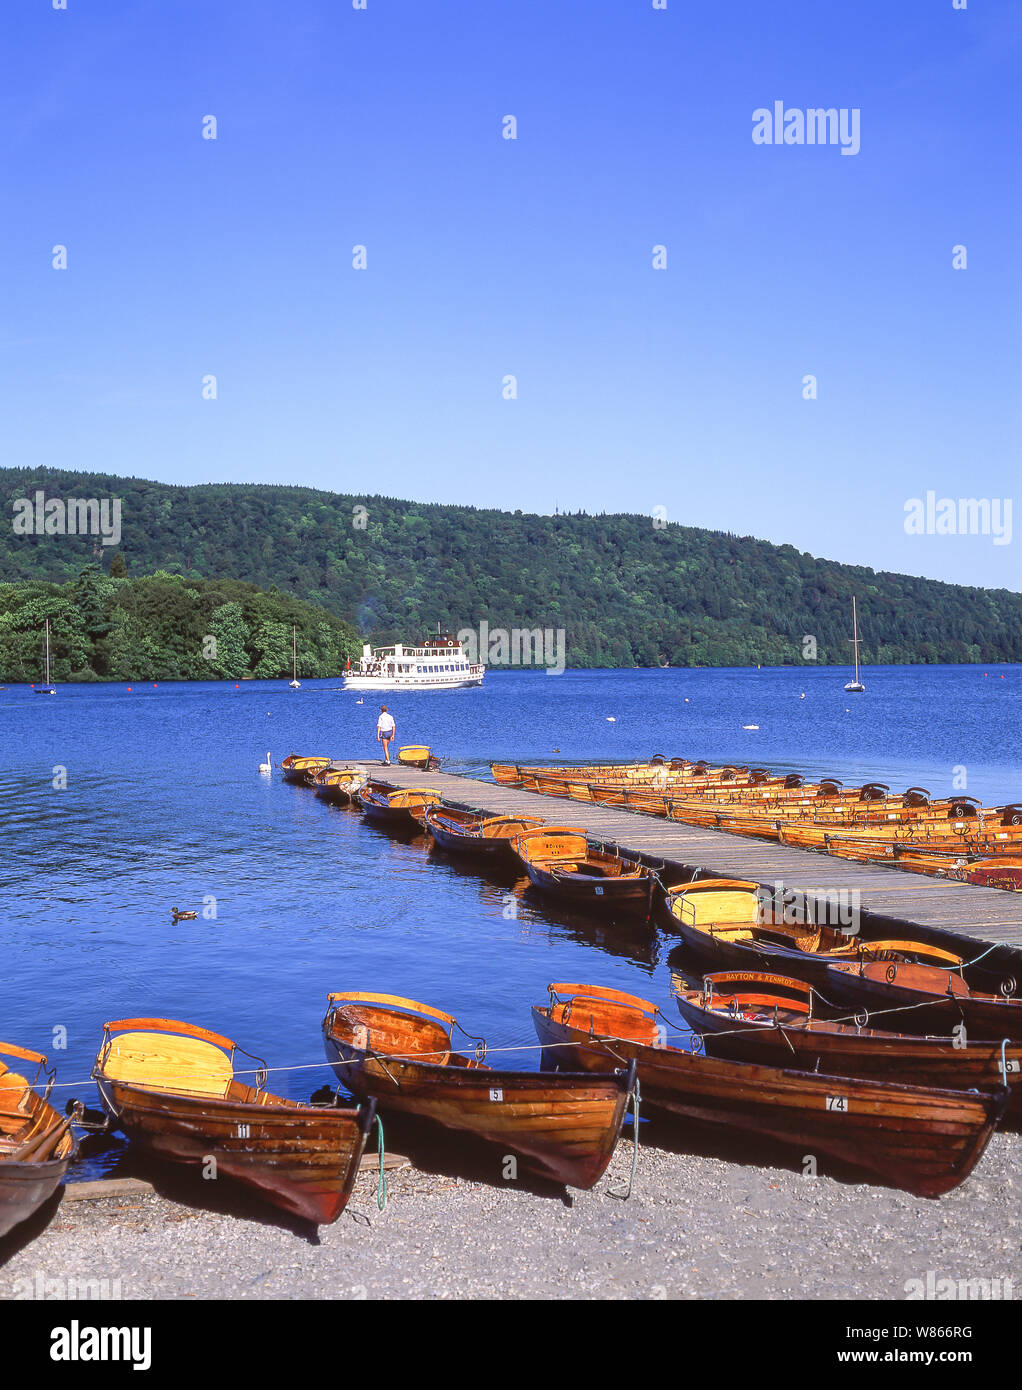 Cruise boat and rowing boats on Lake Windermere, Bowness-on-Windermere, Lake District National Park, Cumbria, England, United Kingdom Stock Photo